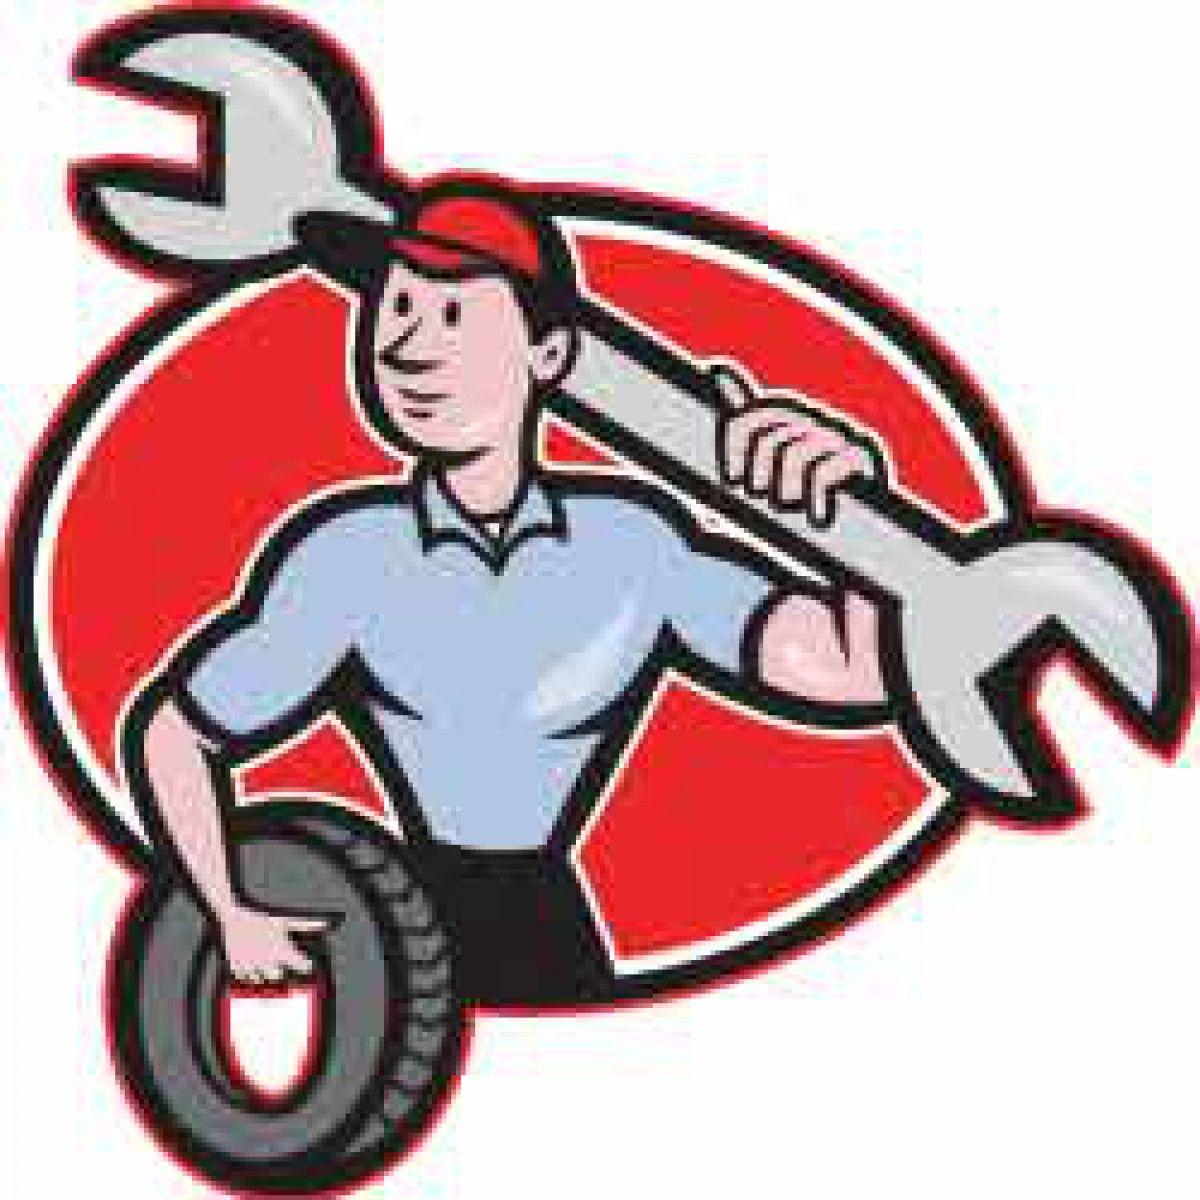 Automobile Mechanic Logo - Superior Van and Mobility Employment Opportunities Kentucky, Indiana